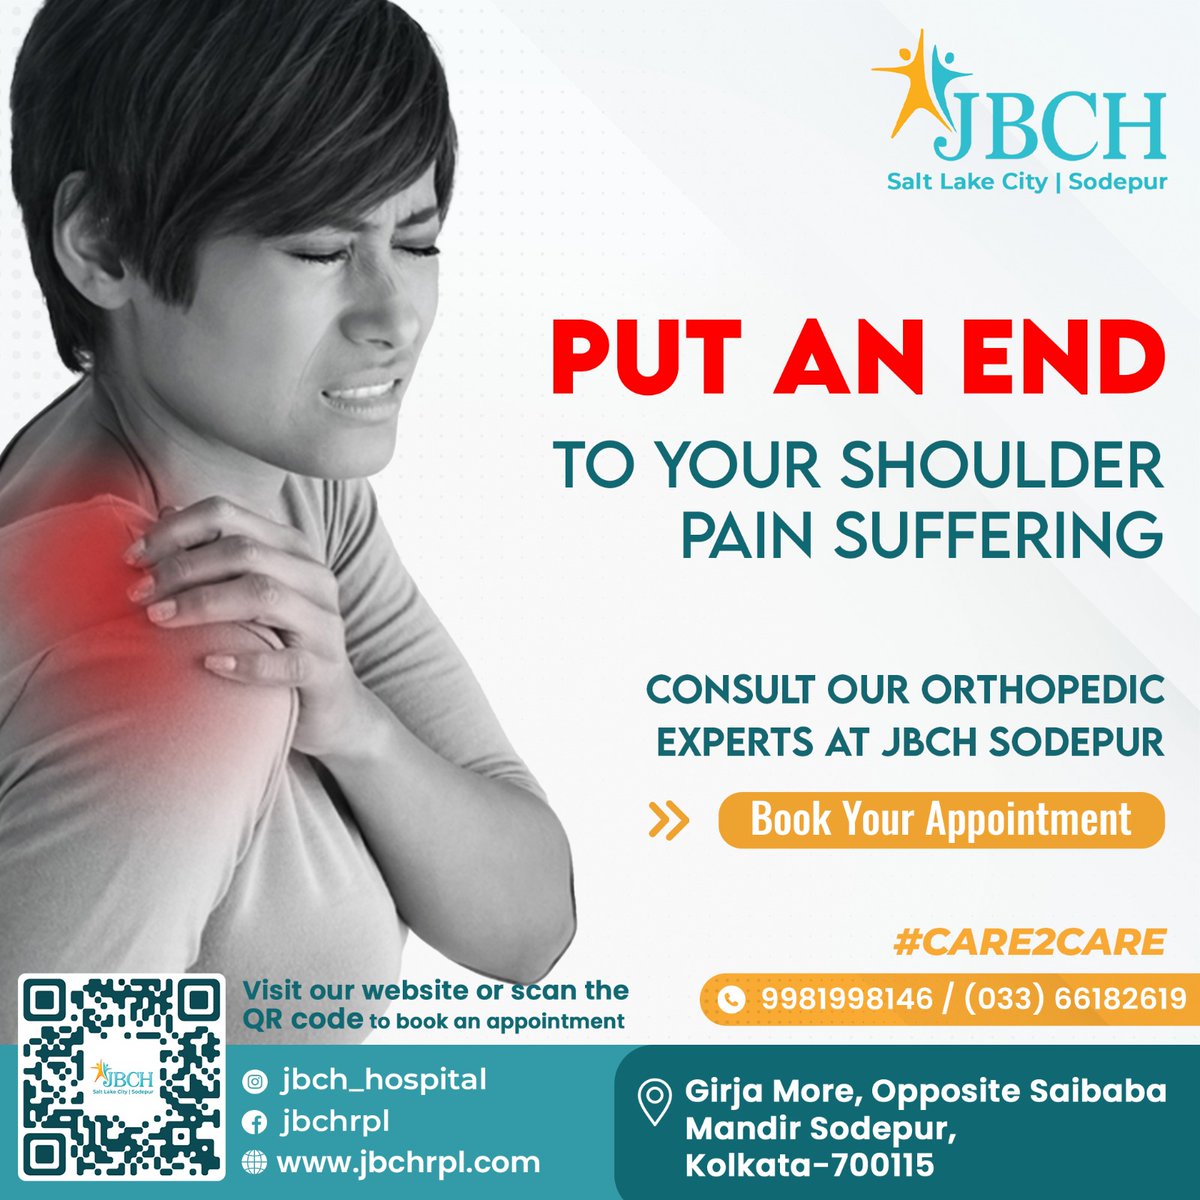 Stop the struggle. Find relief from shoulder pain with JBCH Sodepur's Joint Replacement Surgery.

Book Your Appointment 📝
Visit here for more information: buff.ly/3m6ARI6
.
.
#ShoulderRelief #PainFree #JointCare #CareToCare #KolkataHospital #JointCare #CareToCare #JBCH